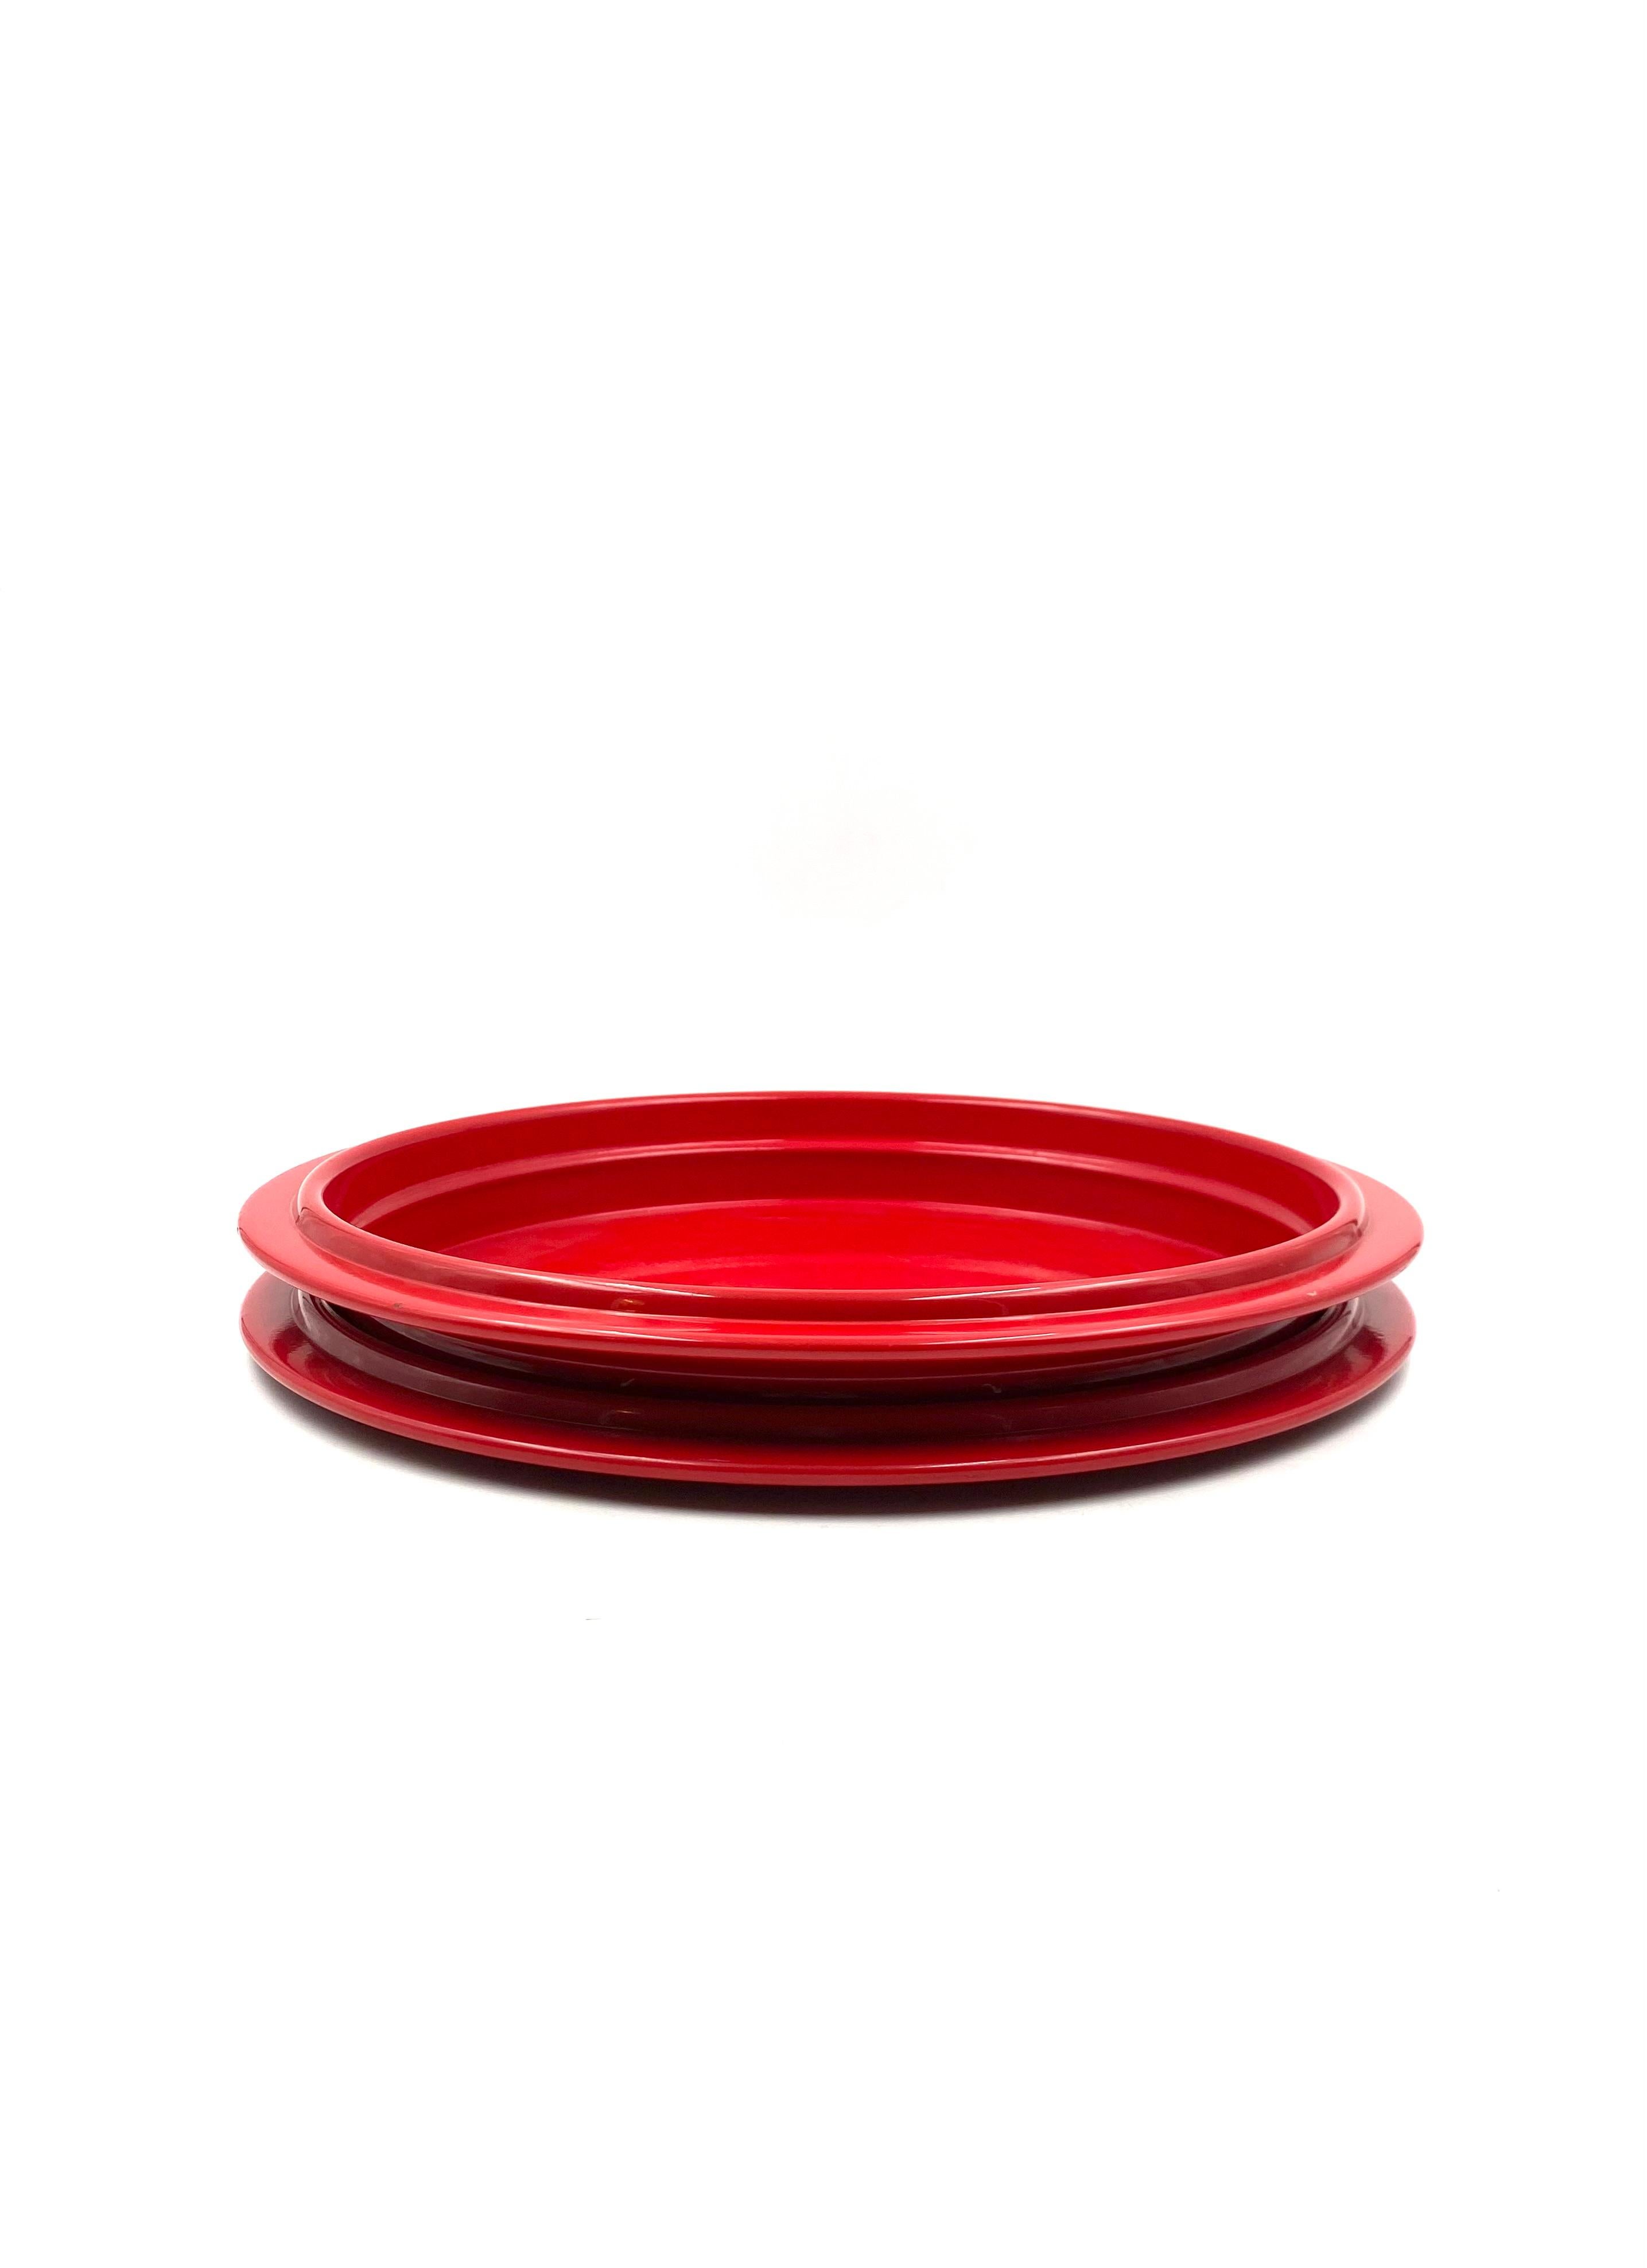 Mid-Century Modern Gianfranco Frattini, Red Centerpiece / Tray, Progetti Italy, 1970s For Sale